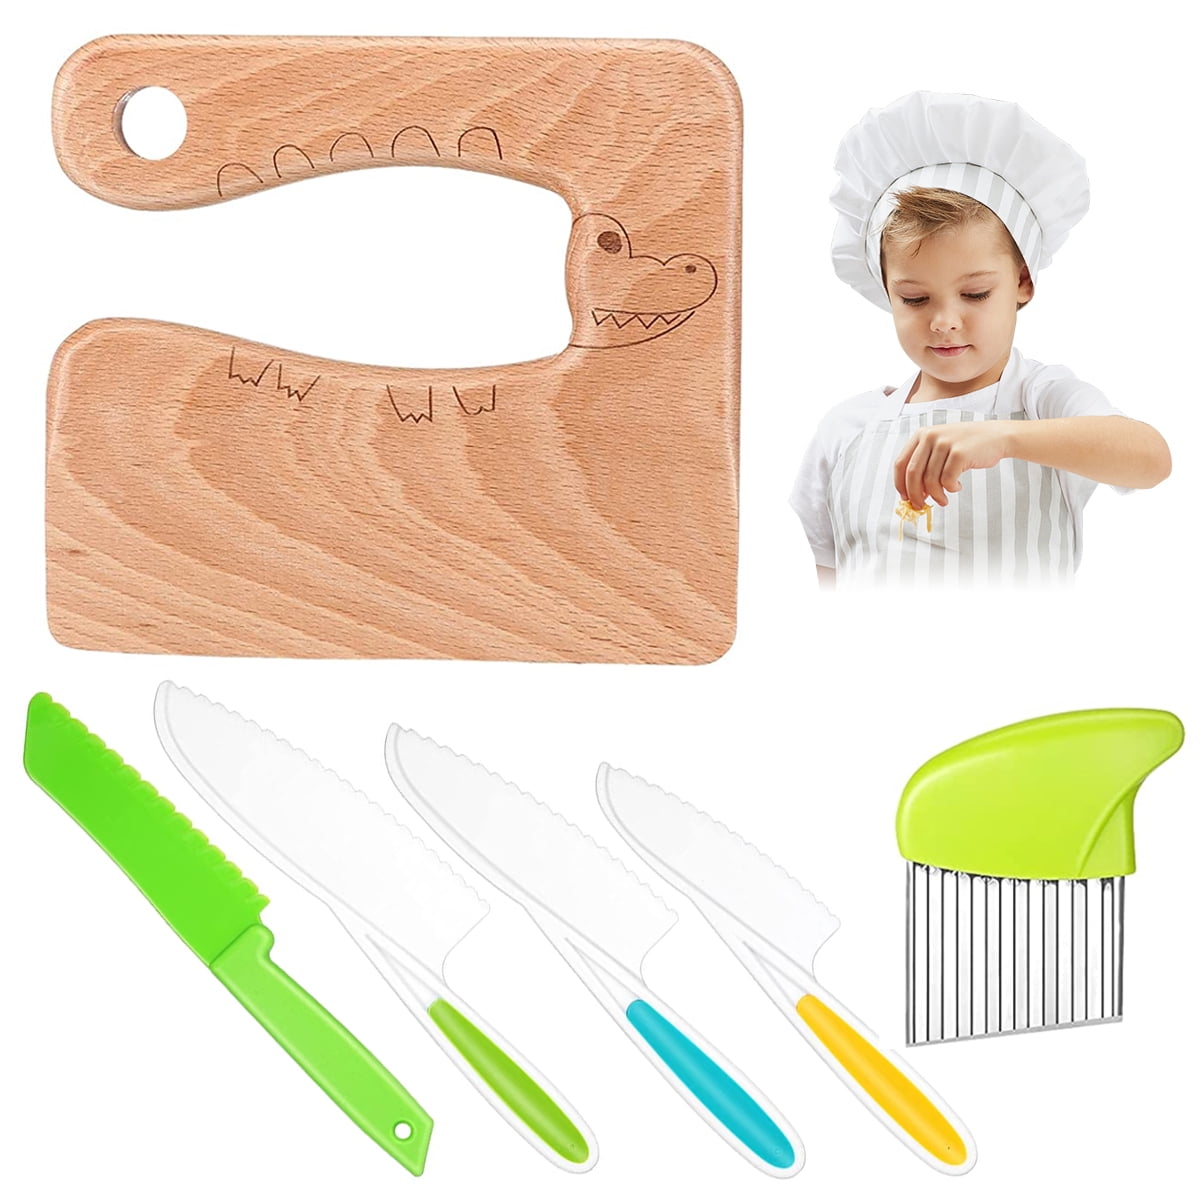 Kids Safe Knifes,Children's Nylon Knives Set Silicone Firm Real Fit Toddler  Love Spoon Beginners Friendly Reusable Peeler Fruit Board Sturdy Childrens